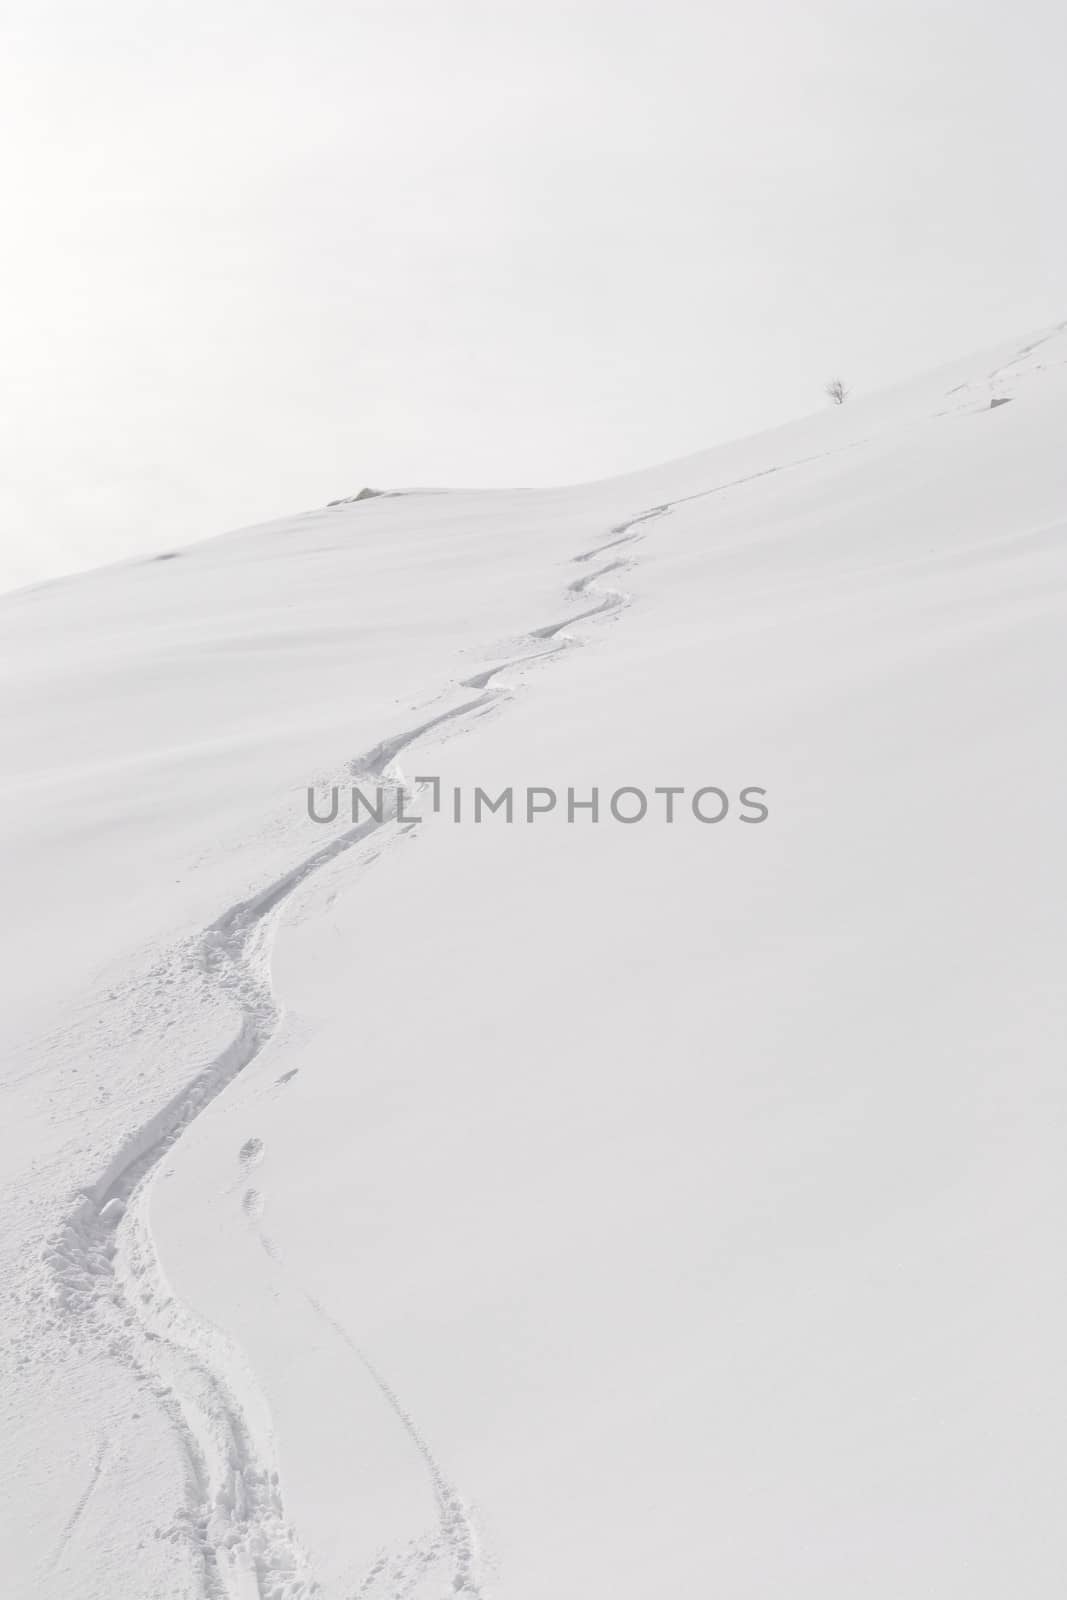 Back country ski tracks in candid powder snow on soft light in a cloudy day